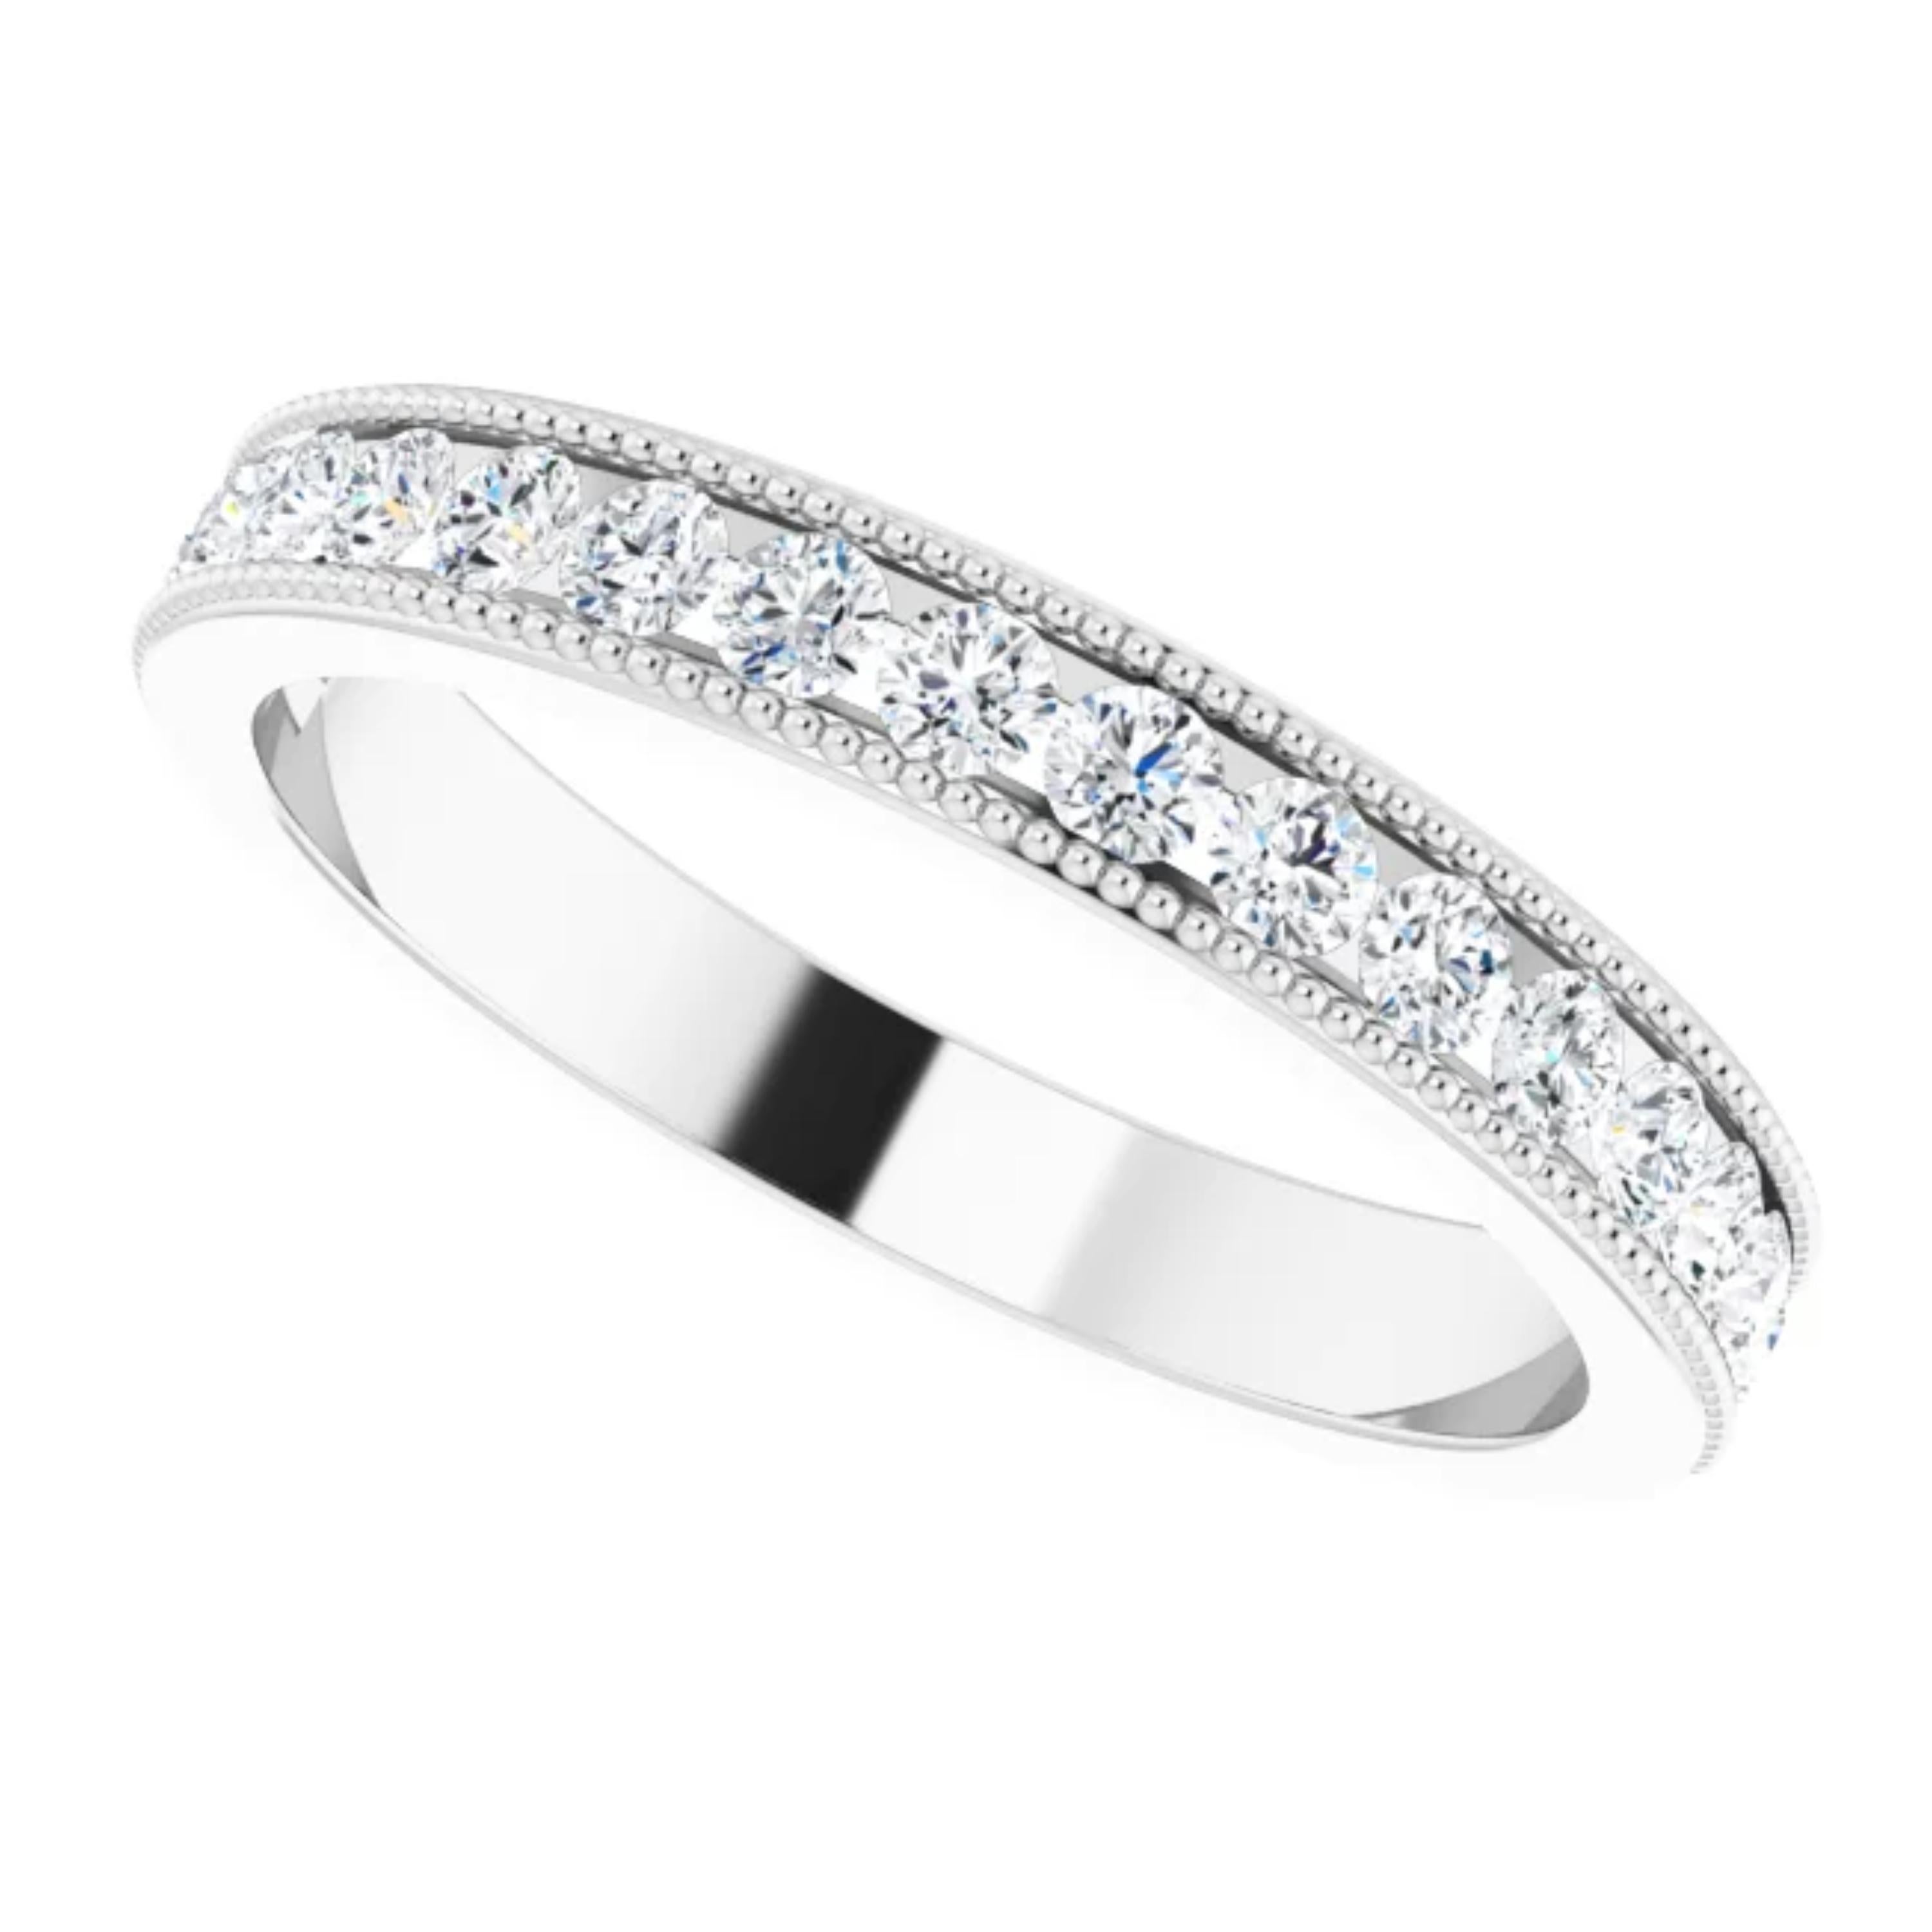 Round Cut Vintage Style Diamond Wedding Ring Anniversary Band 18k White Gold 0.52 Carat For Sale